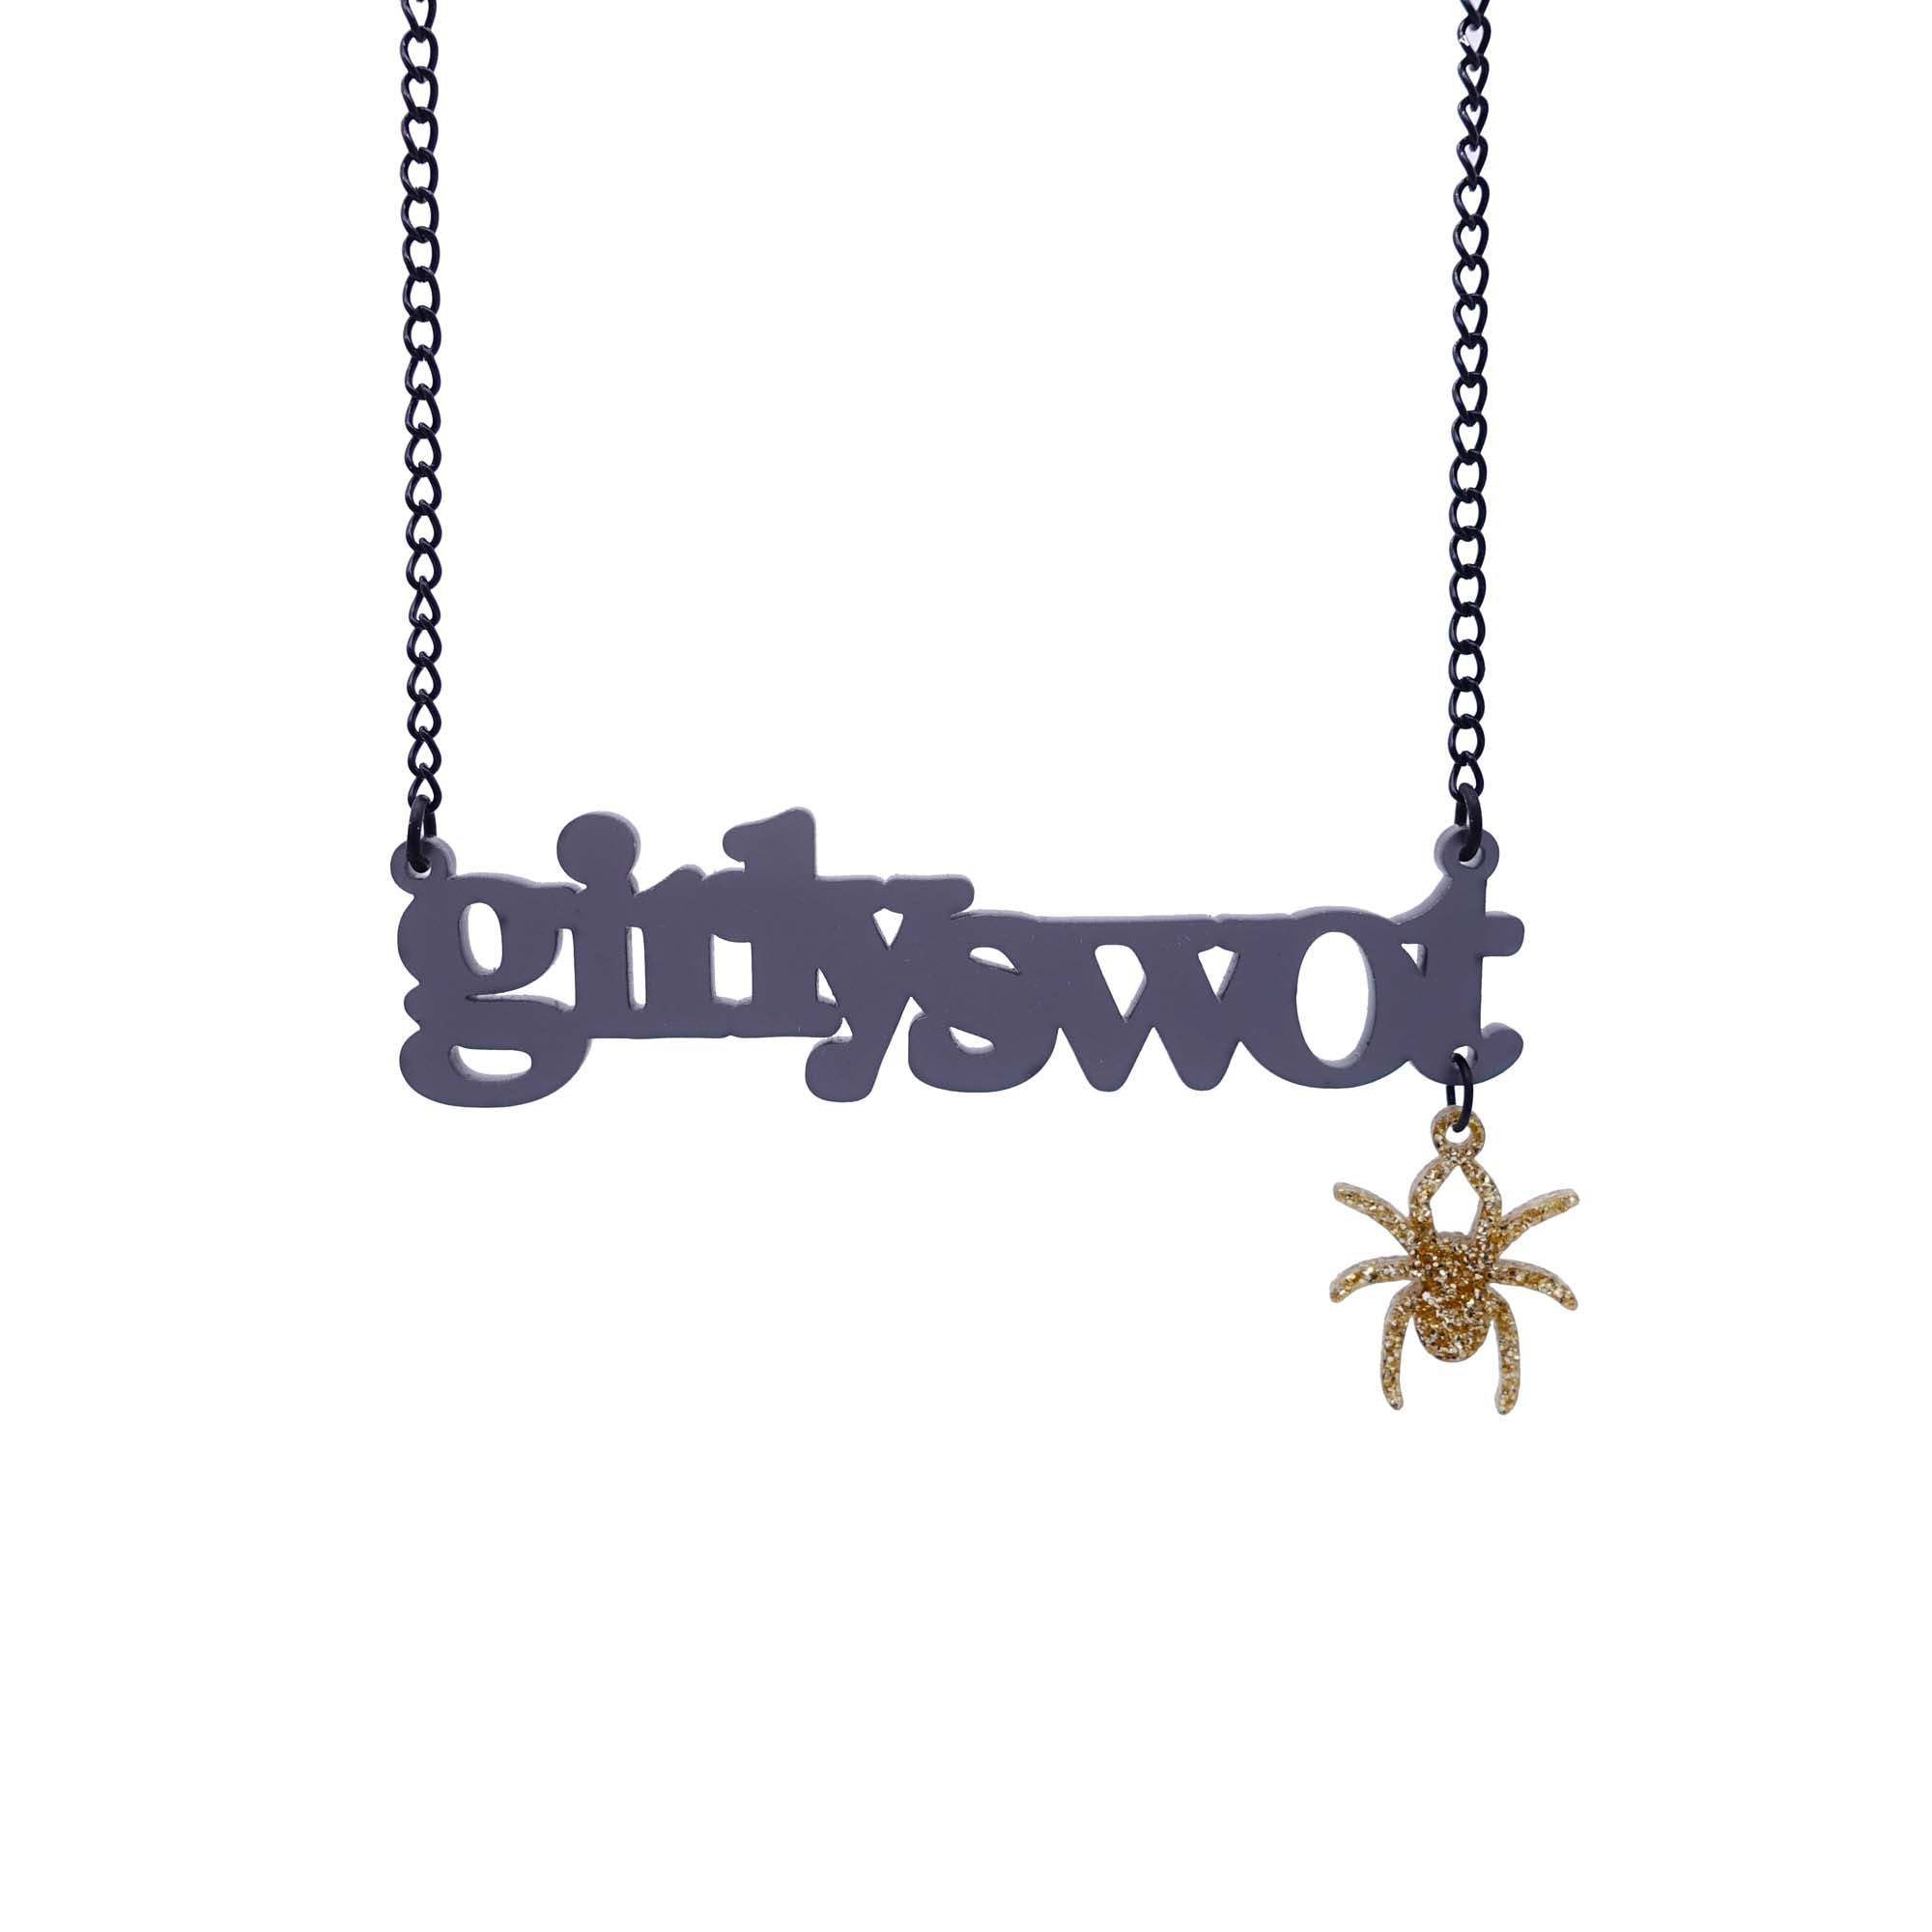 Girly Swot necklace with hanging Lady Hale spider, designed by Sarah Day for Wear and Resist. Supporting women's charities and helping empower women with statement jewellery that says something! 